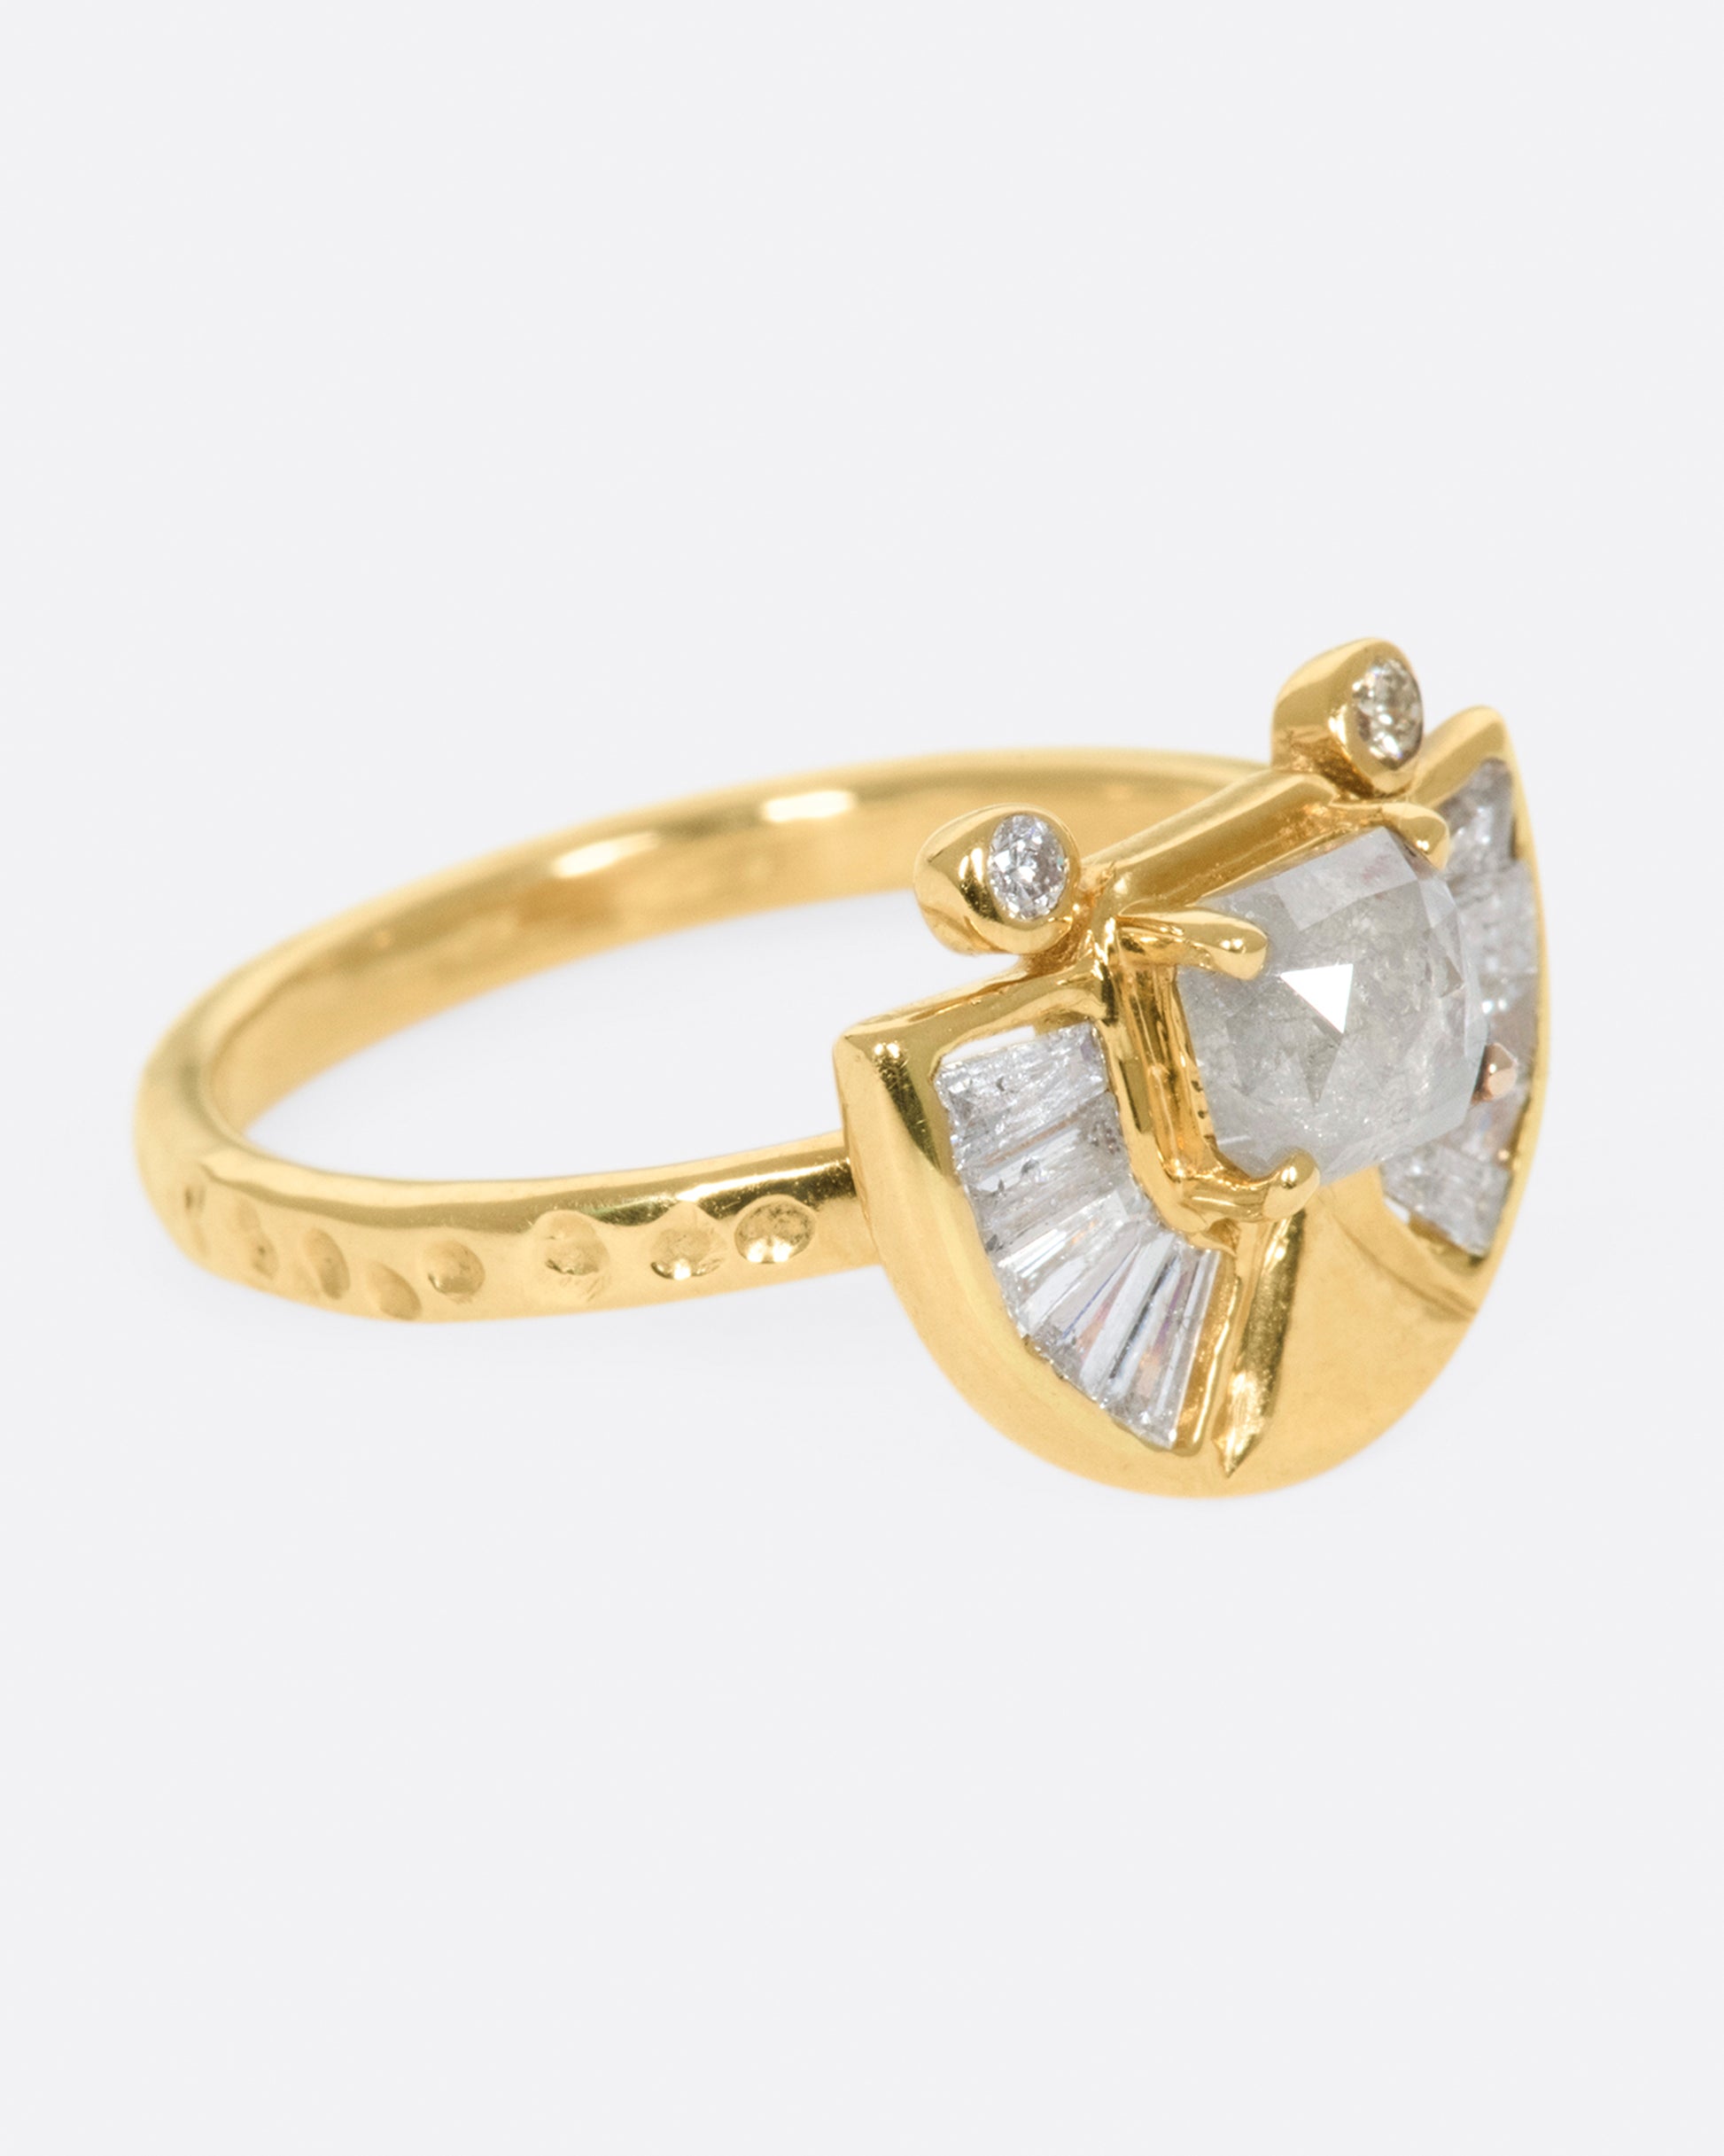 A textured gold ring with a rose cut salt & pepper diamond at its center surrounded by round and baguette diamond accents.